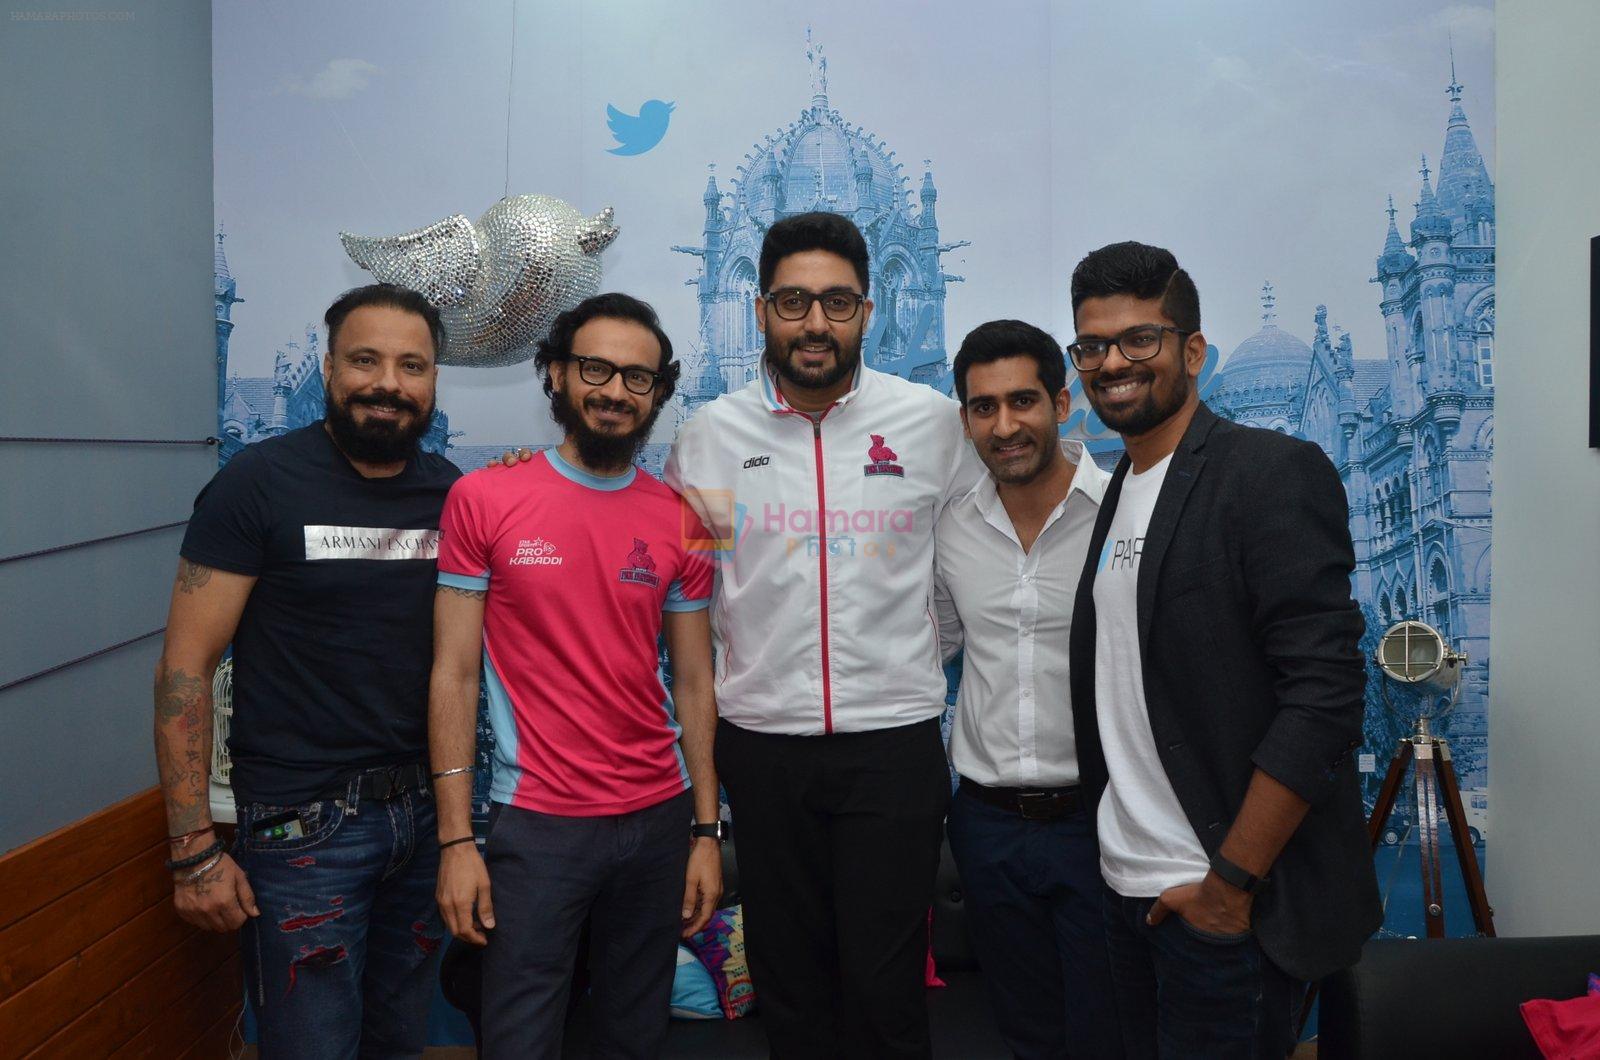 Abhishek Bachchan ties up with Twitter for Pro Kabaddi League on 5th June 2016